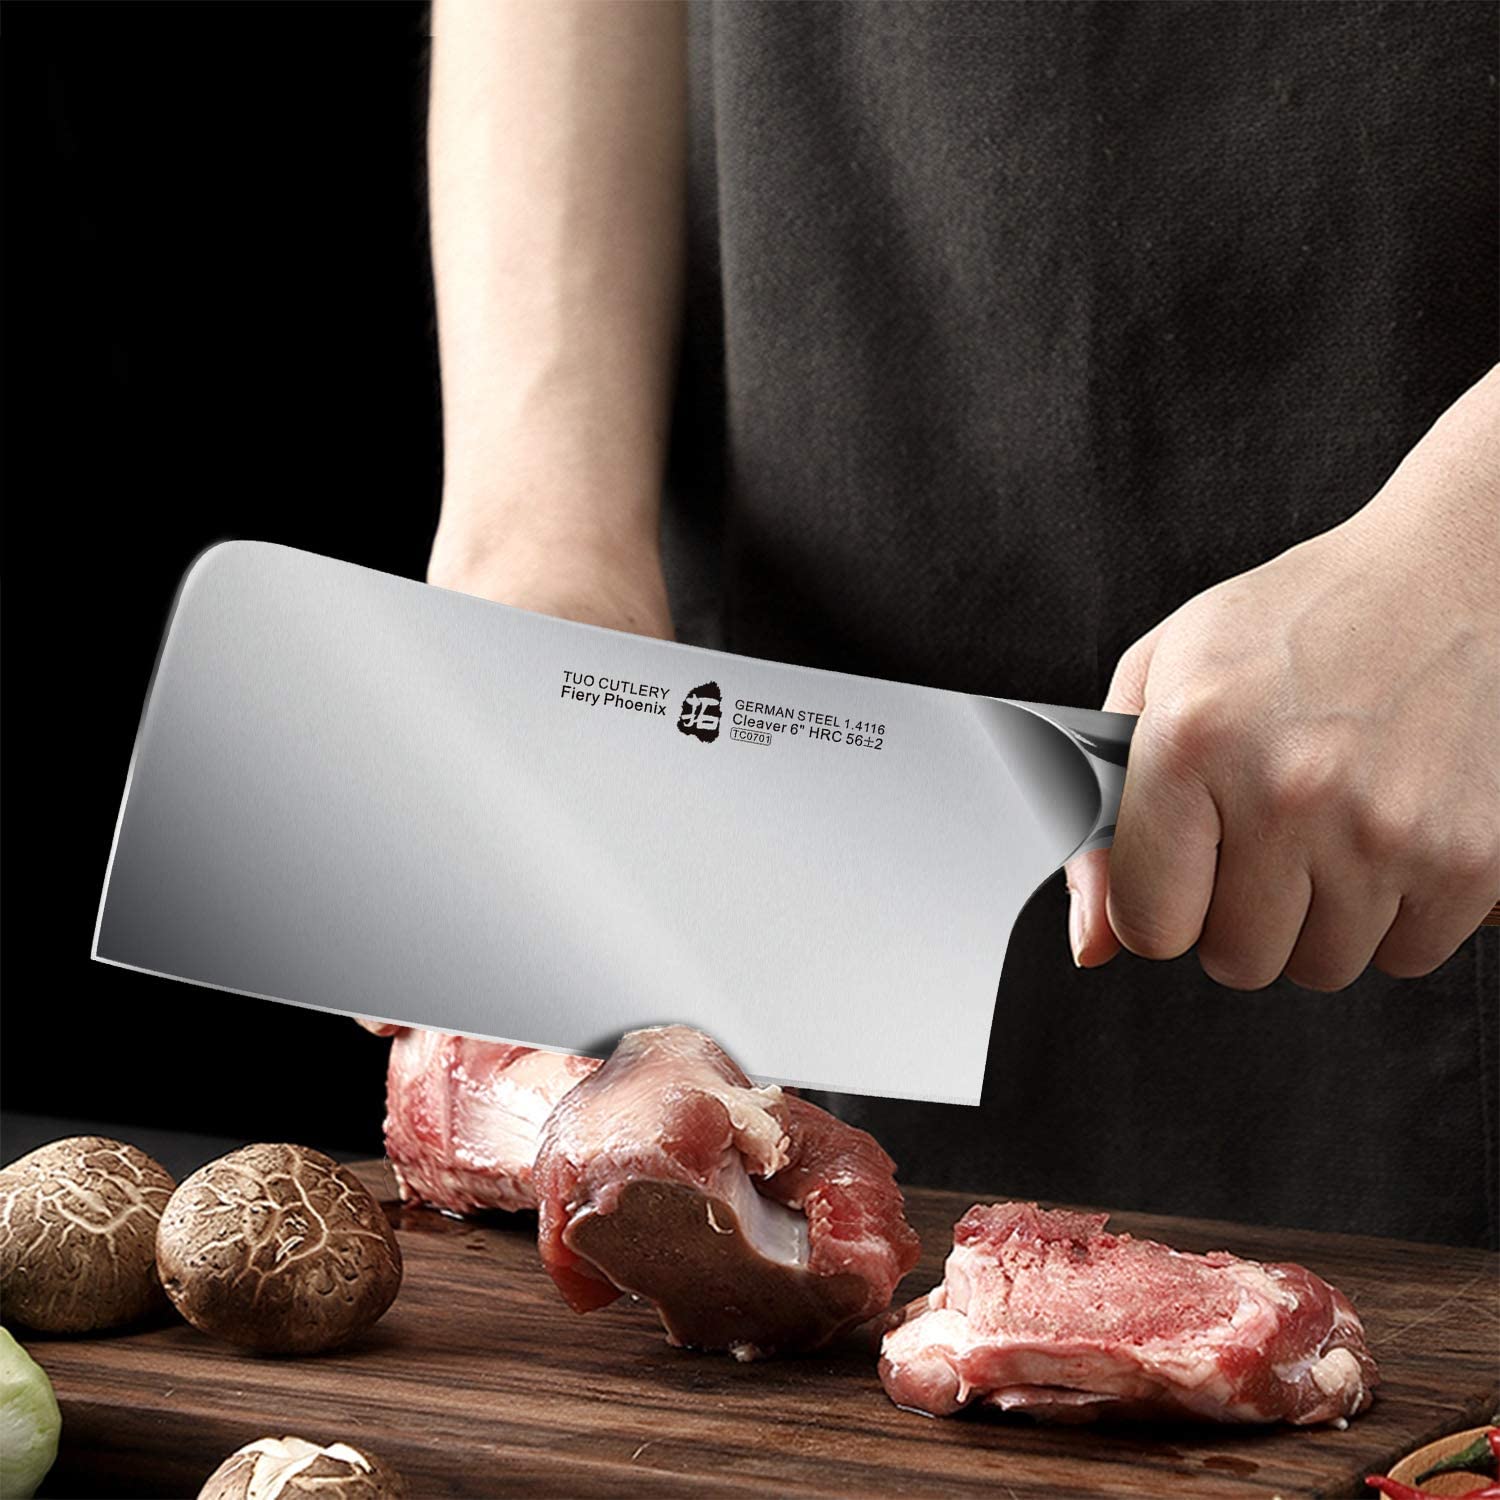  TUO Cleaver Knife, 7 inch Chinese Cleaver Vegetable Meat  Cleaver Knife, High Carbon Stainless Steel Chopping Knife with Ergonomic:  Home & Kitchen